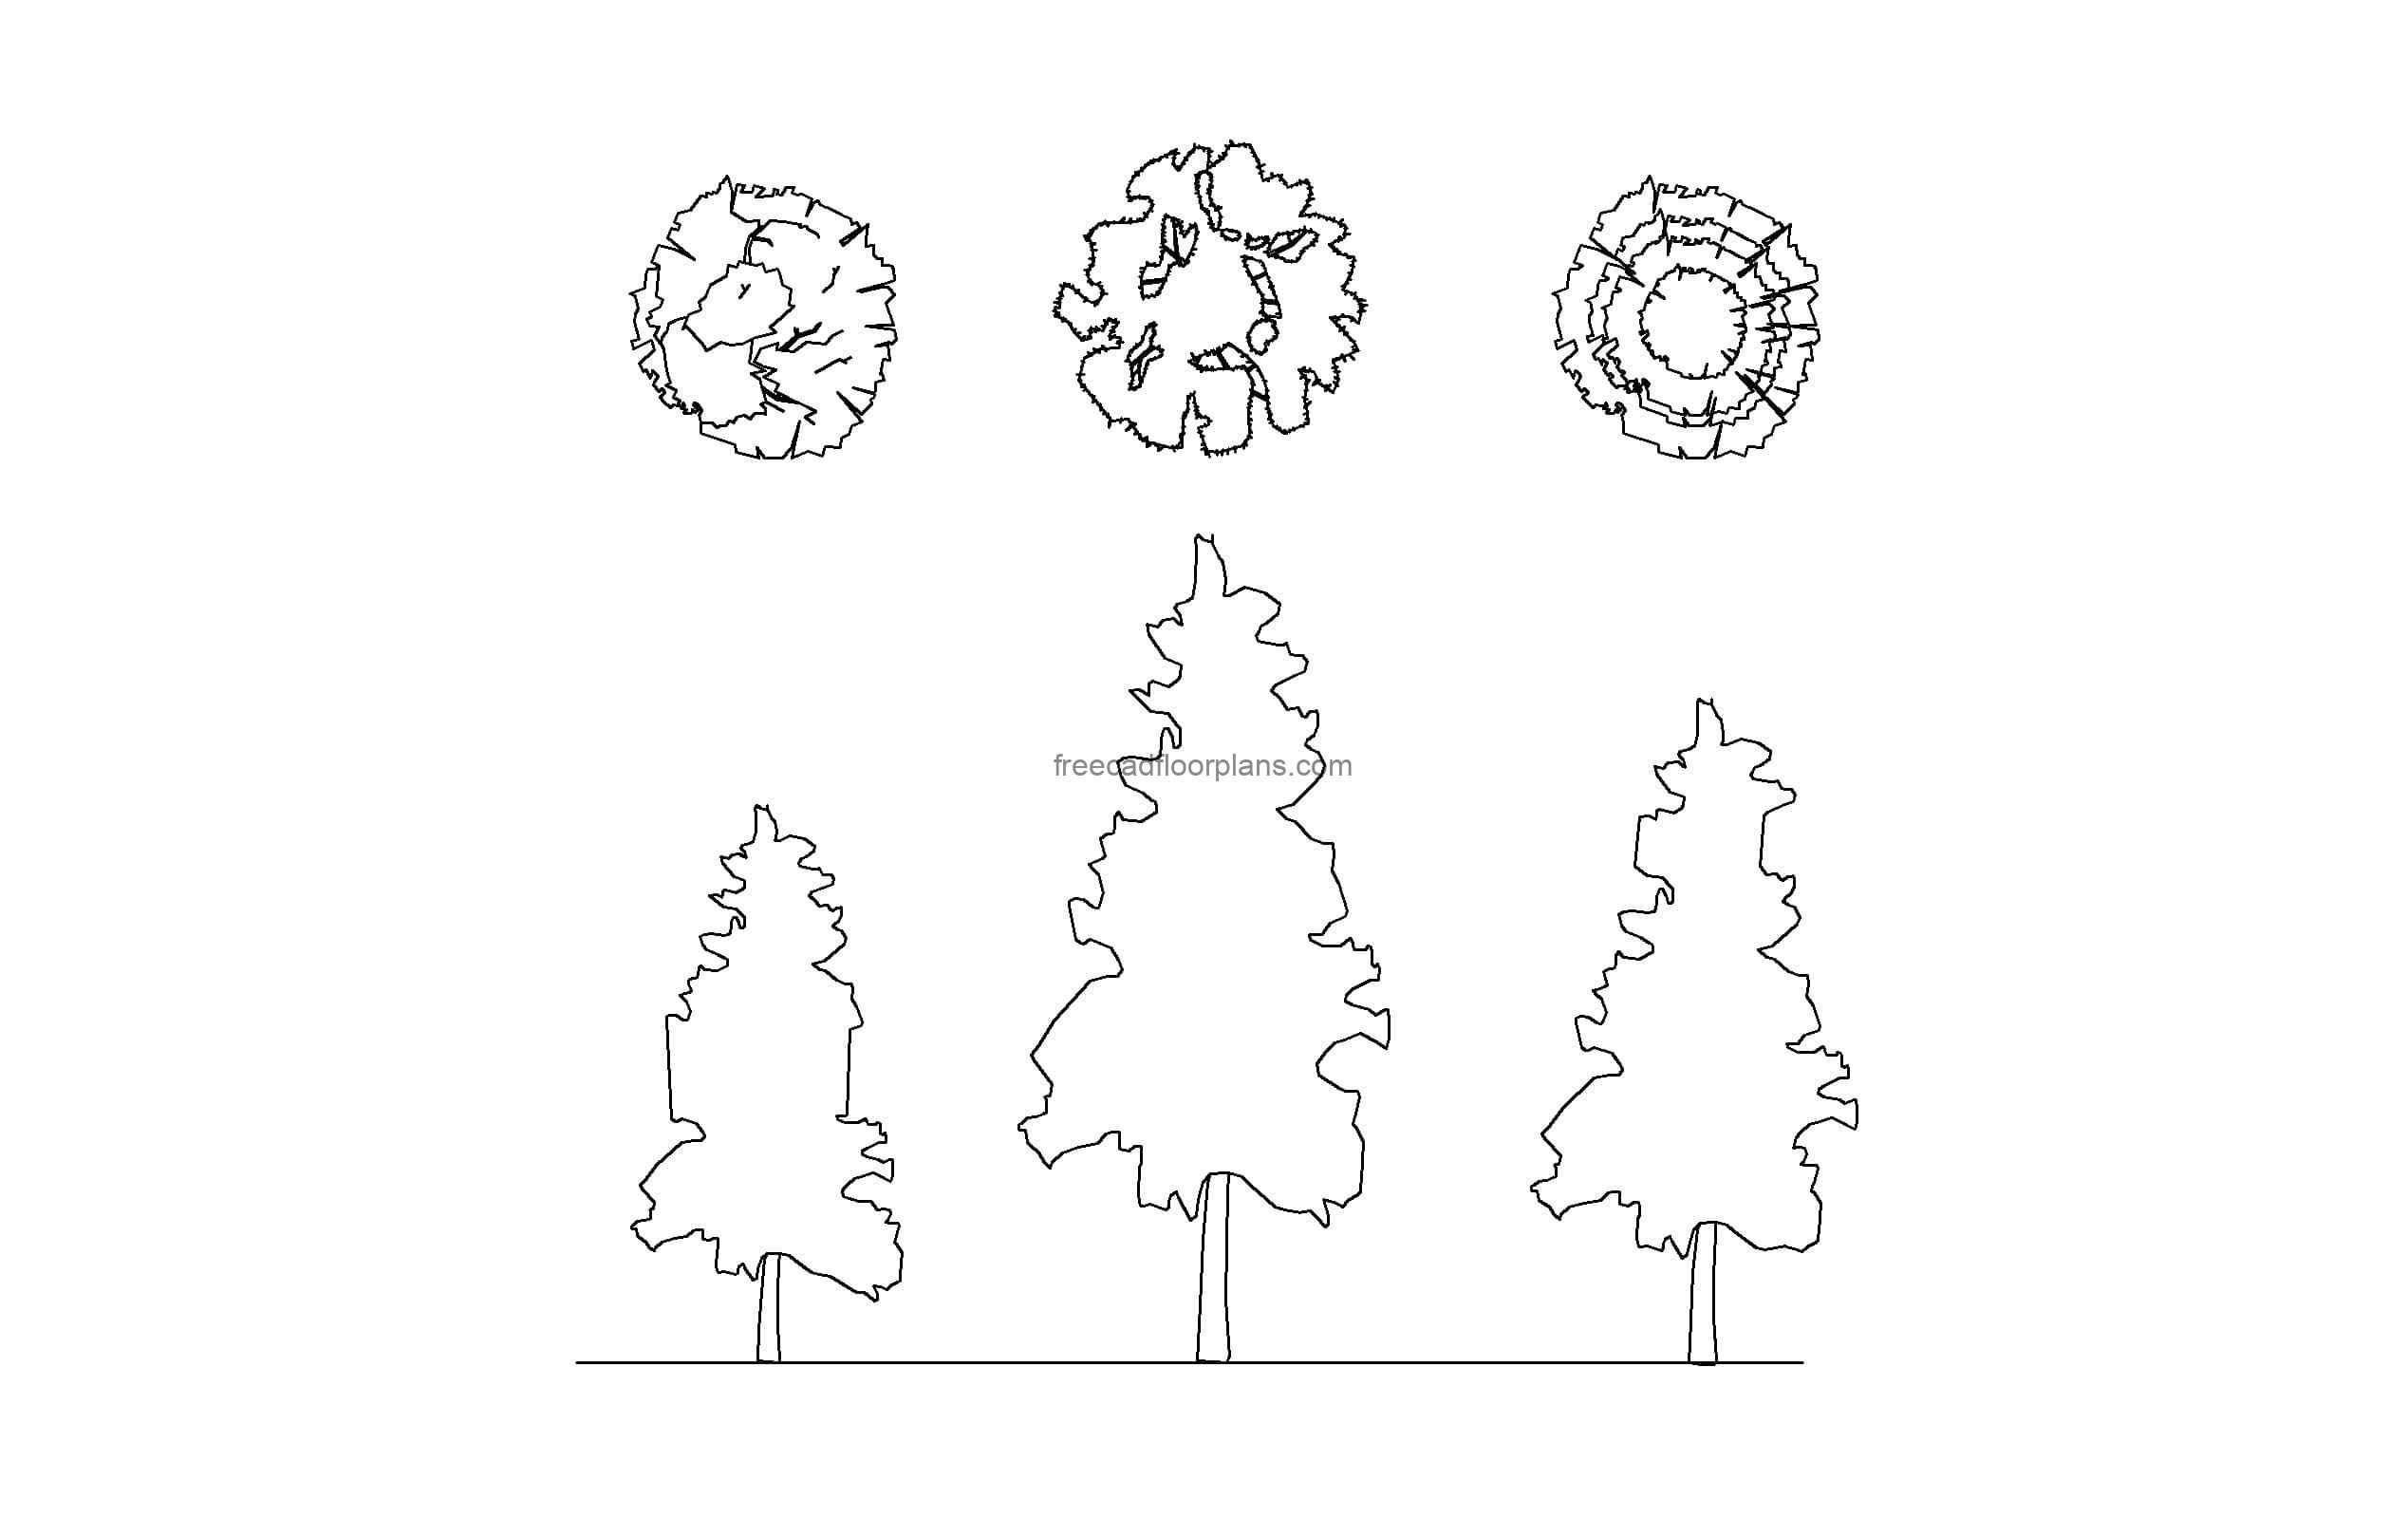 autocad drawing of pines tree plan and elevation 2d views, dwg file free for download